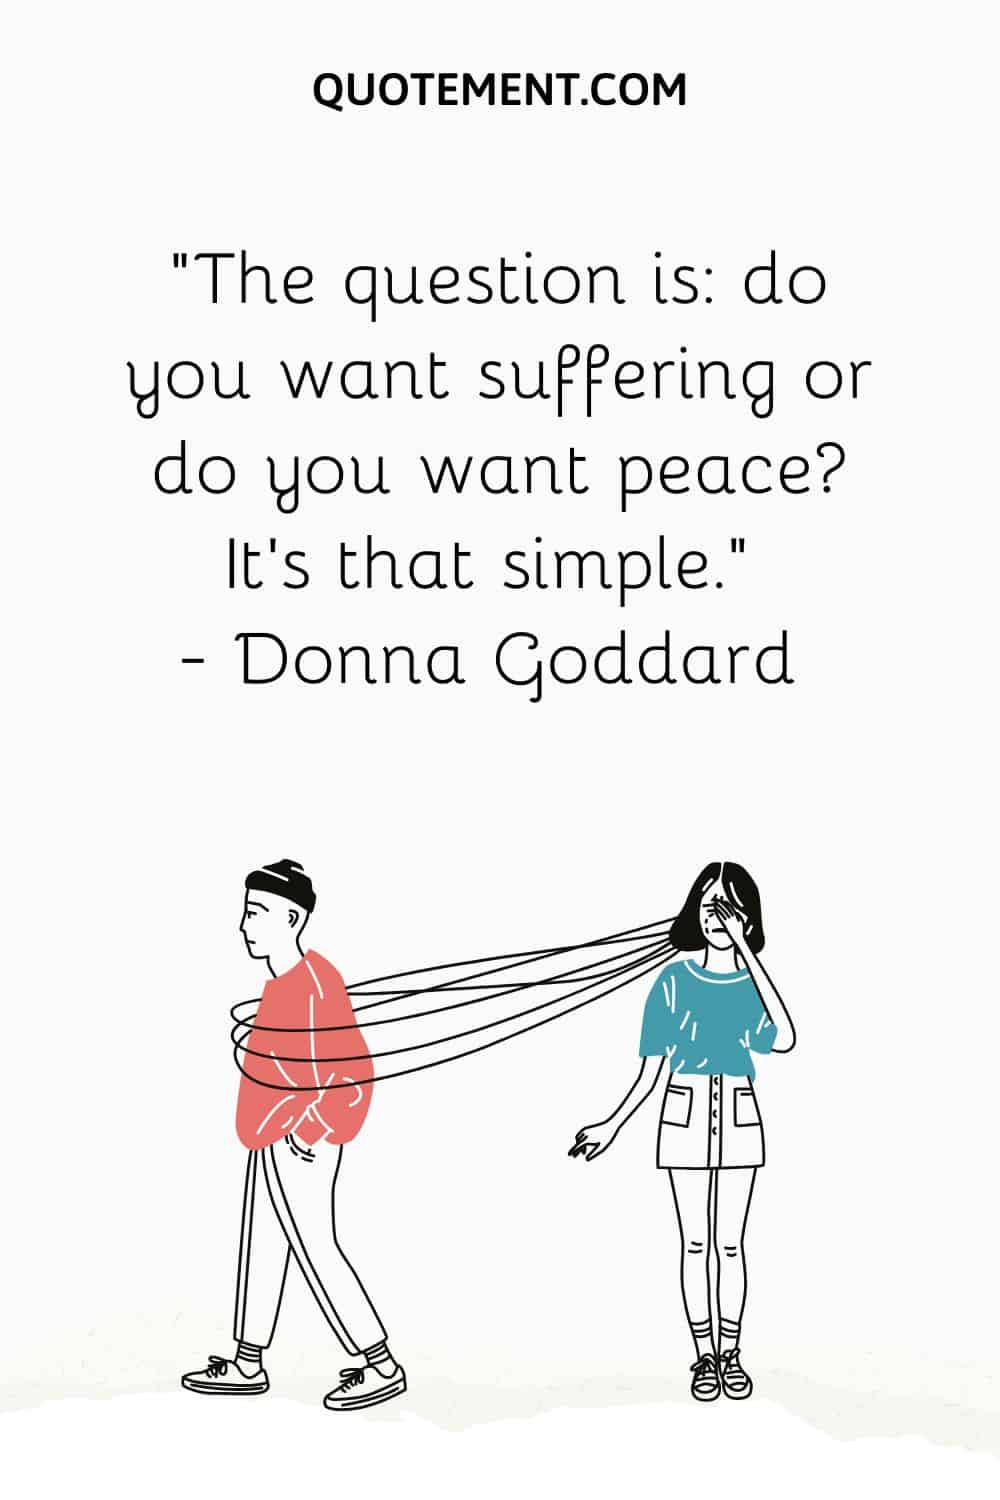 The question is do you want suffering or do you want peace It's that simple